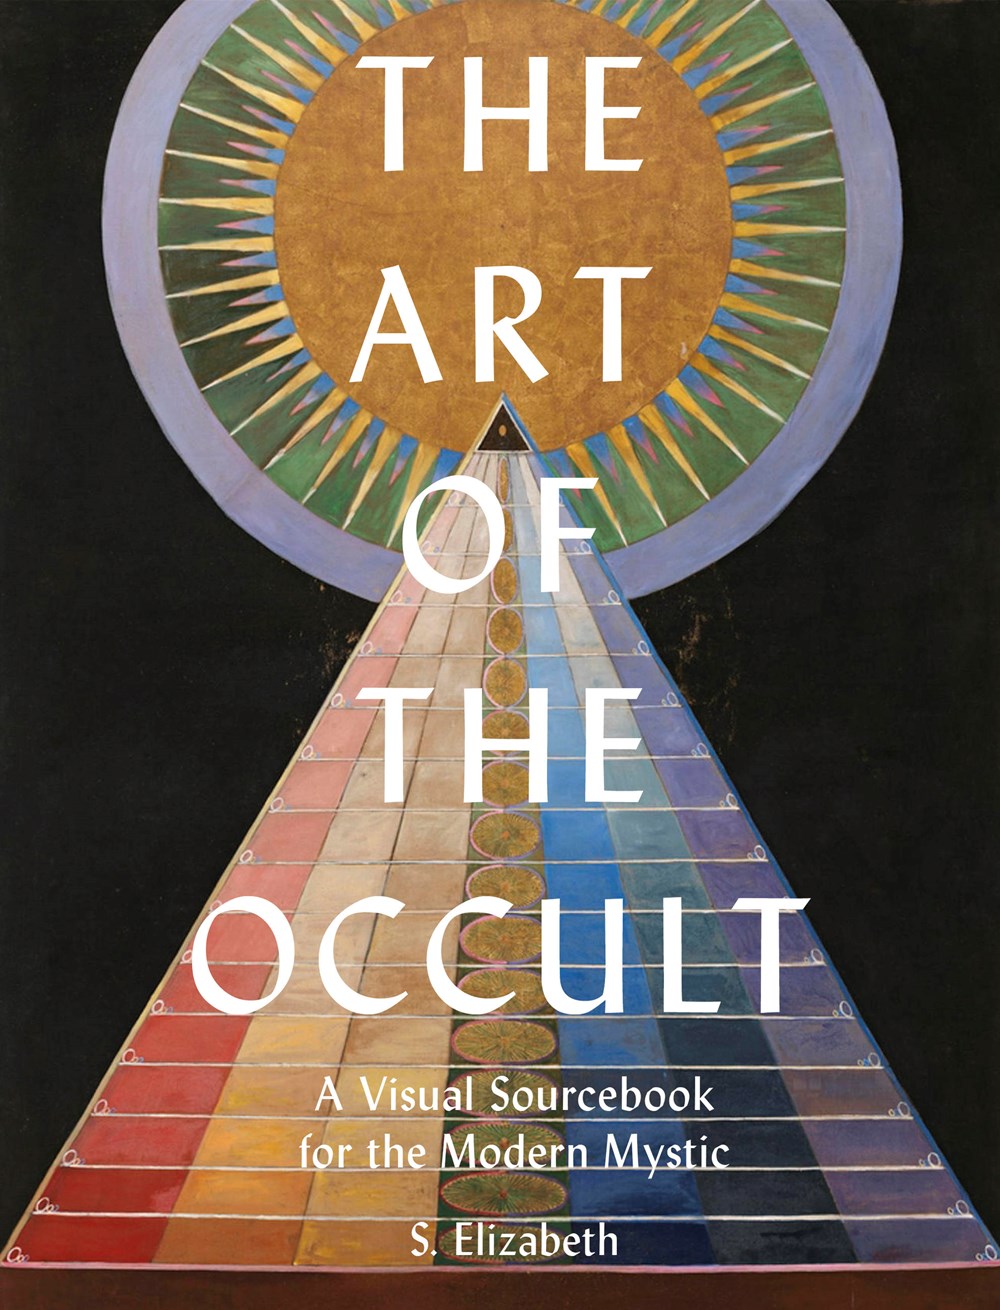 The Art Of The Occult front cover.